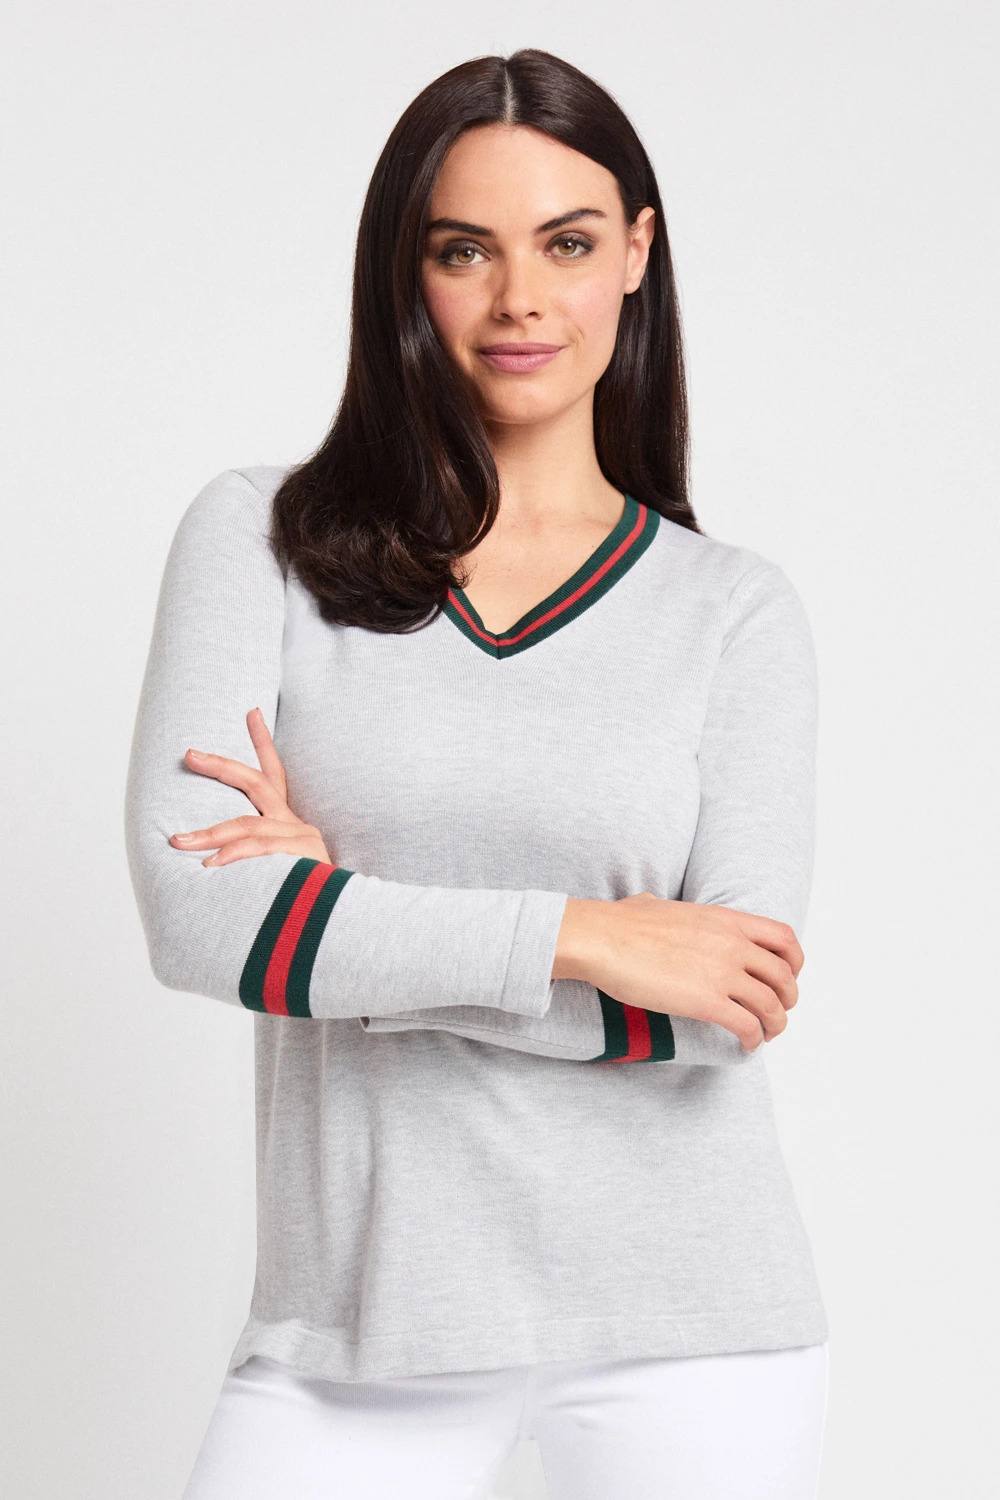 Peace of Cloth V-Neck Tipped Sweater in Flint at Village Vogue.